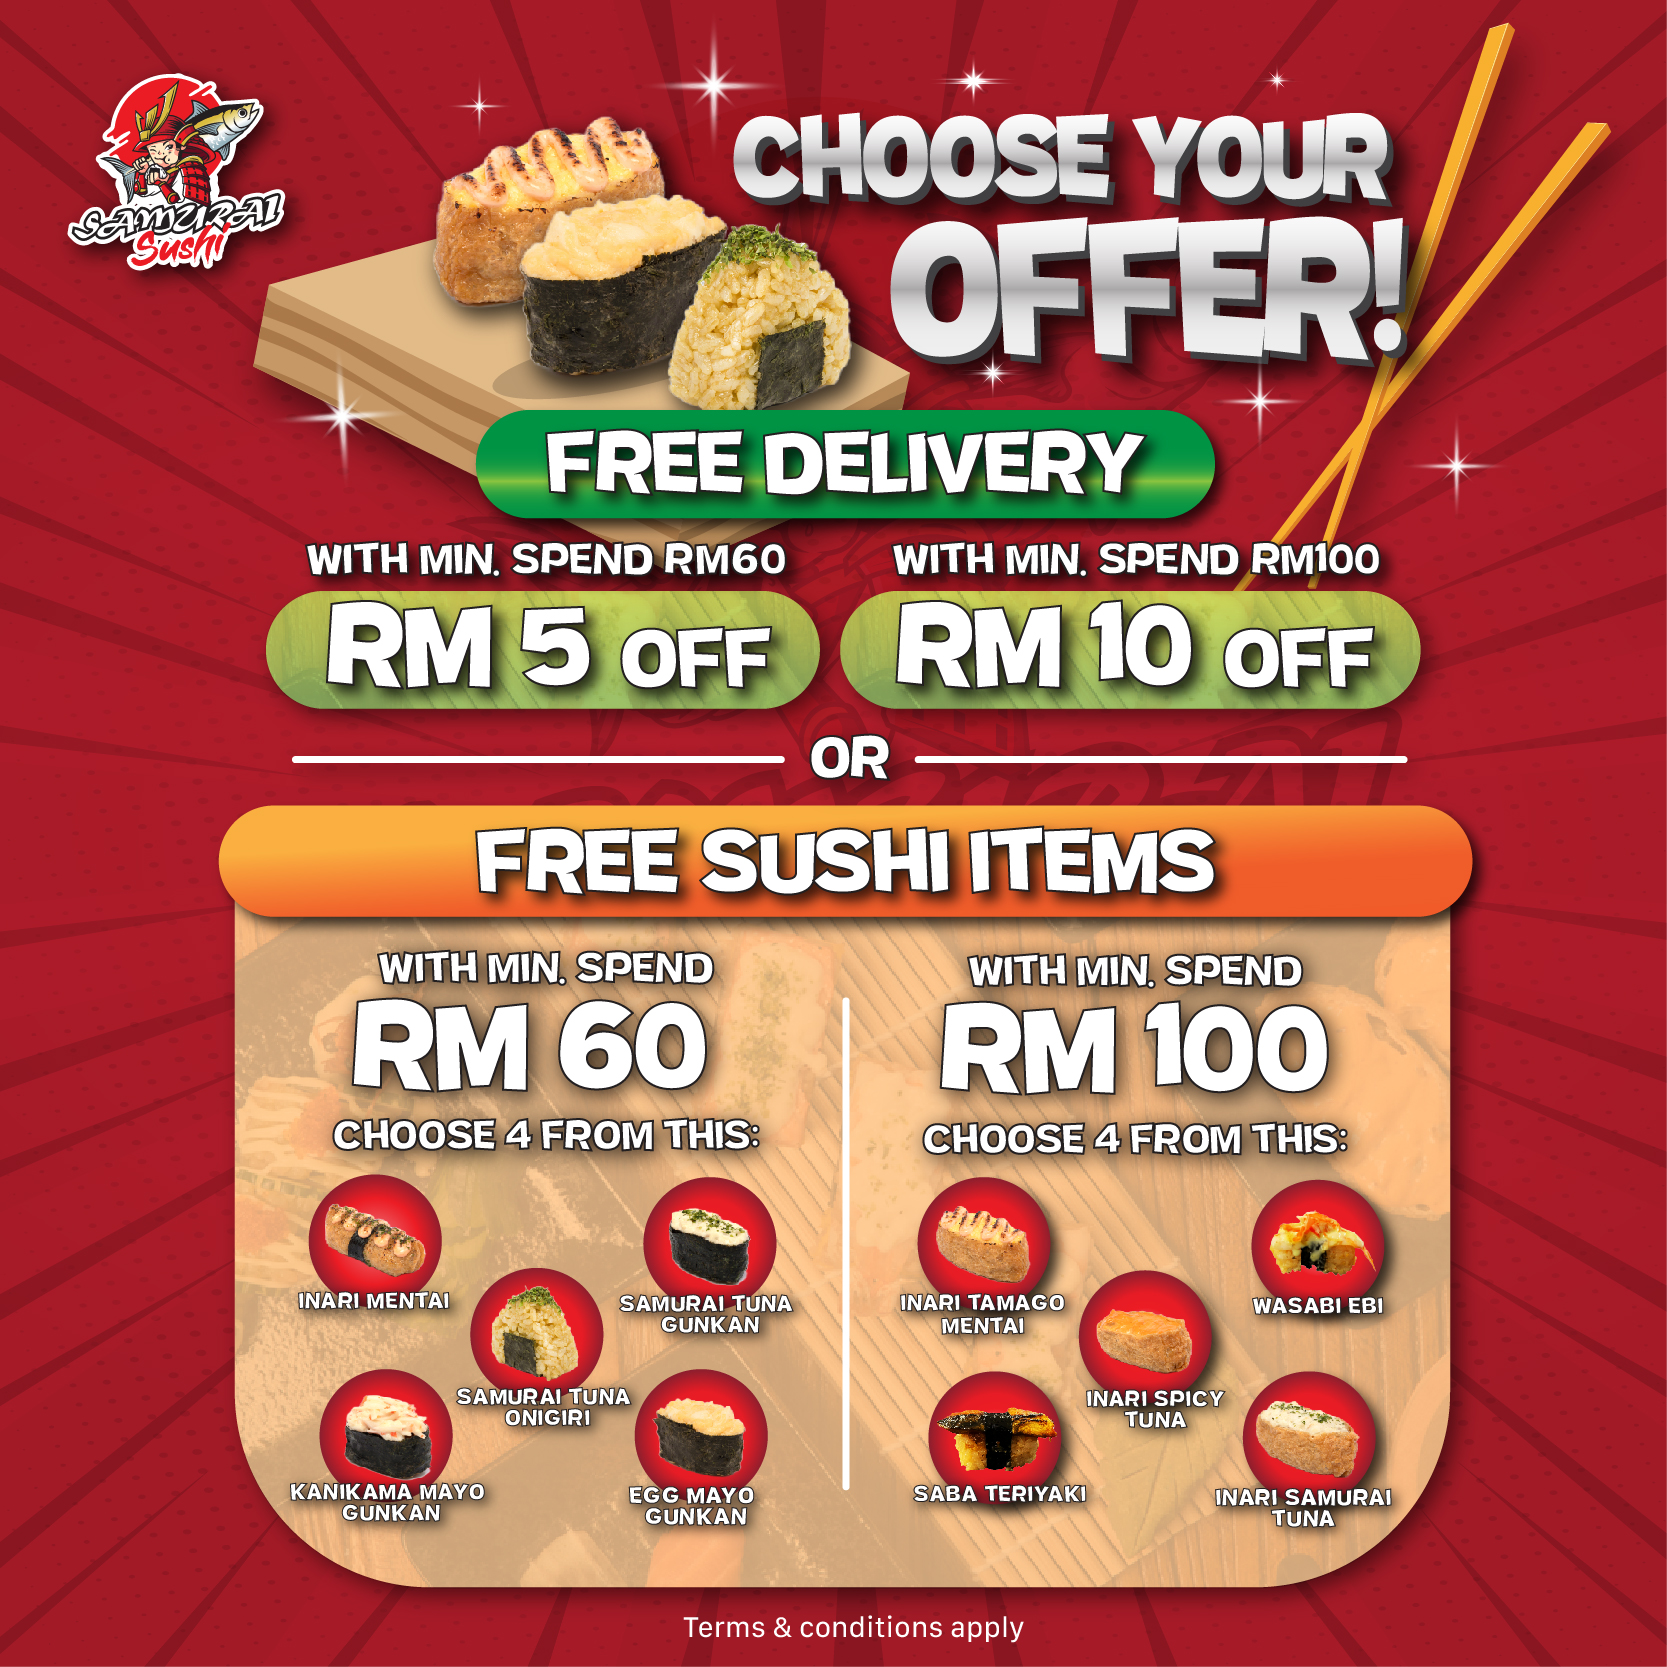 CHOOSE YOUR OFFER! (Free Delivery or Free Sushi Items